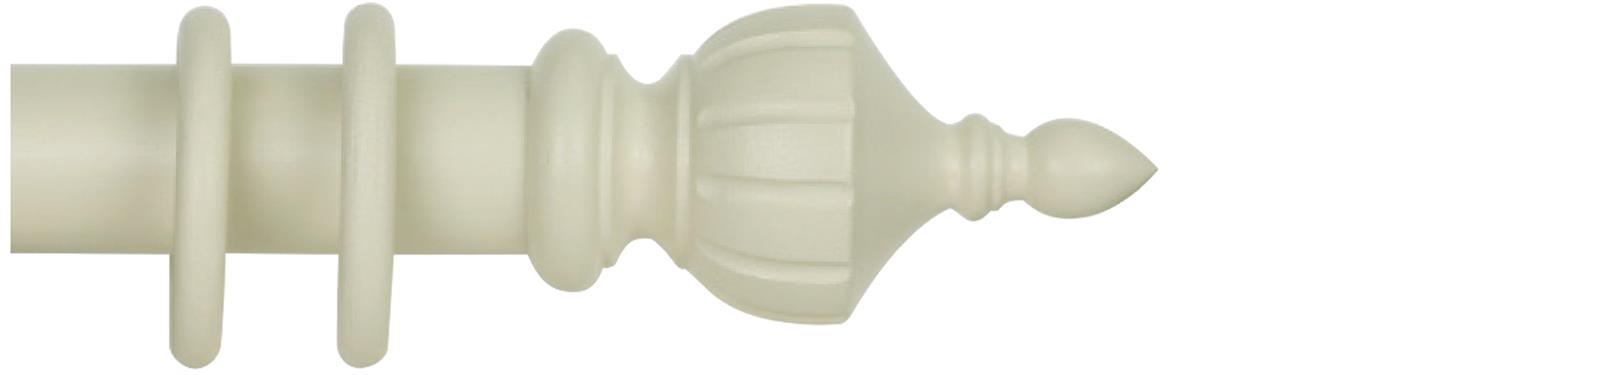 Cameron Fuller 50mm Pole Ivory Crown